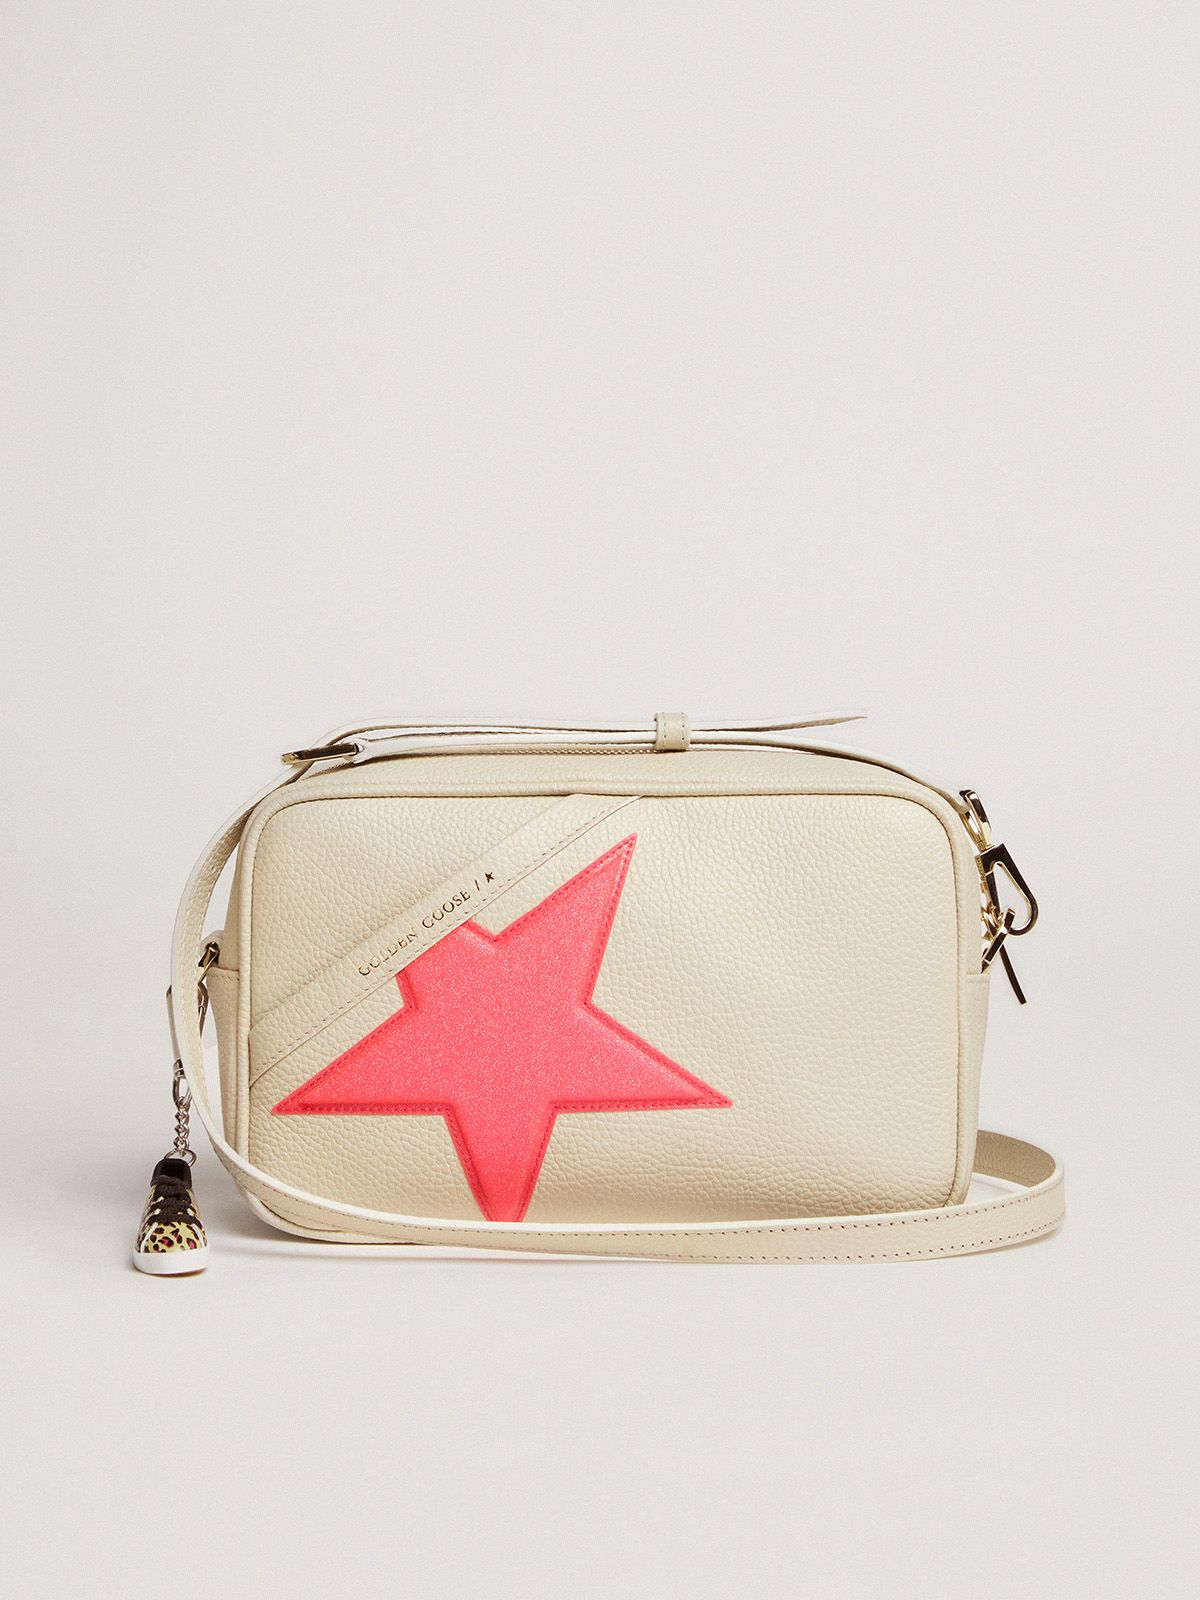 Off-white Star in hammered leather, fuchsia Golden star with iridescent glitter | Goose